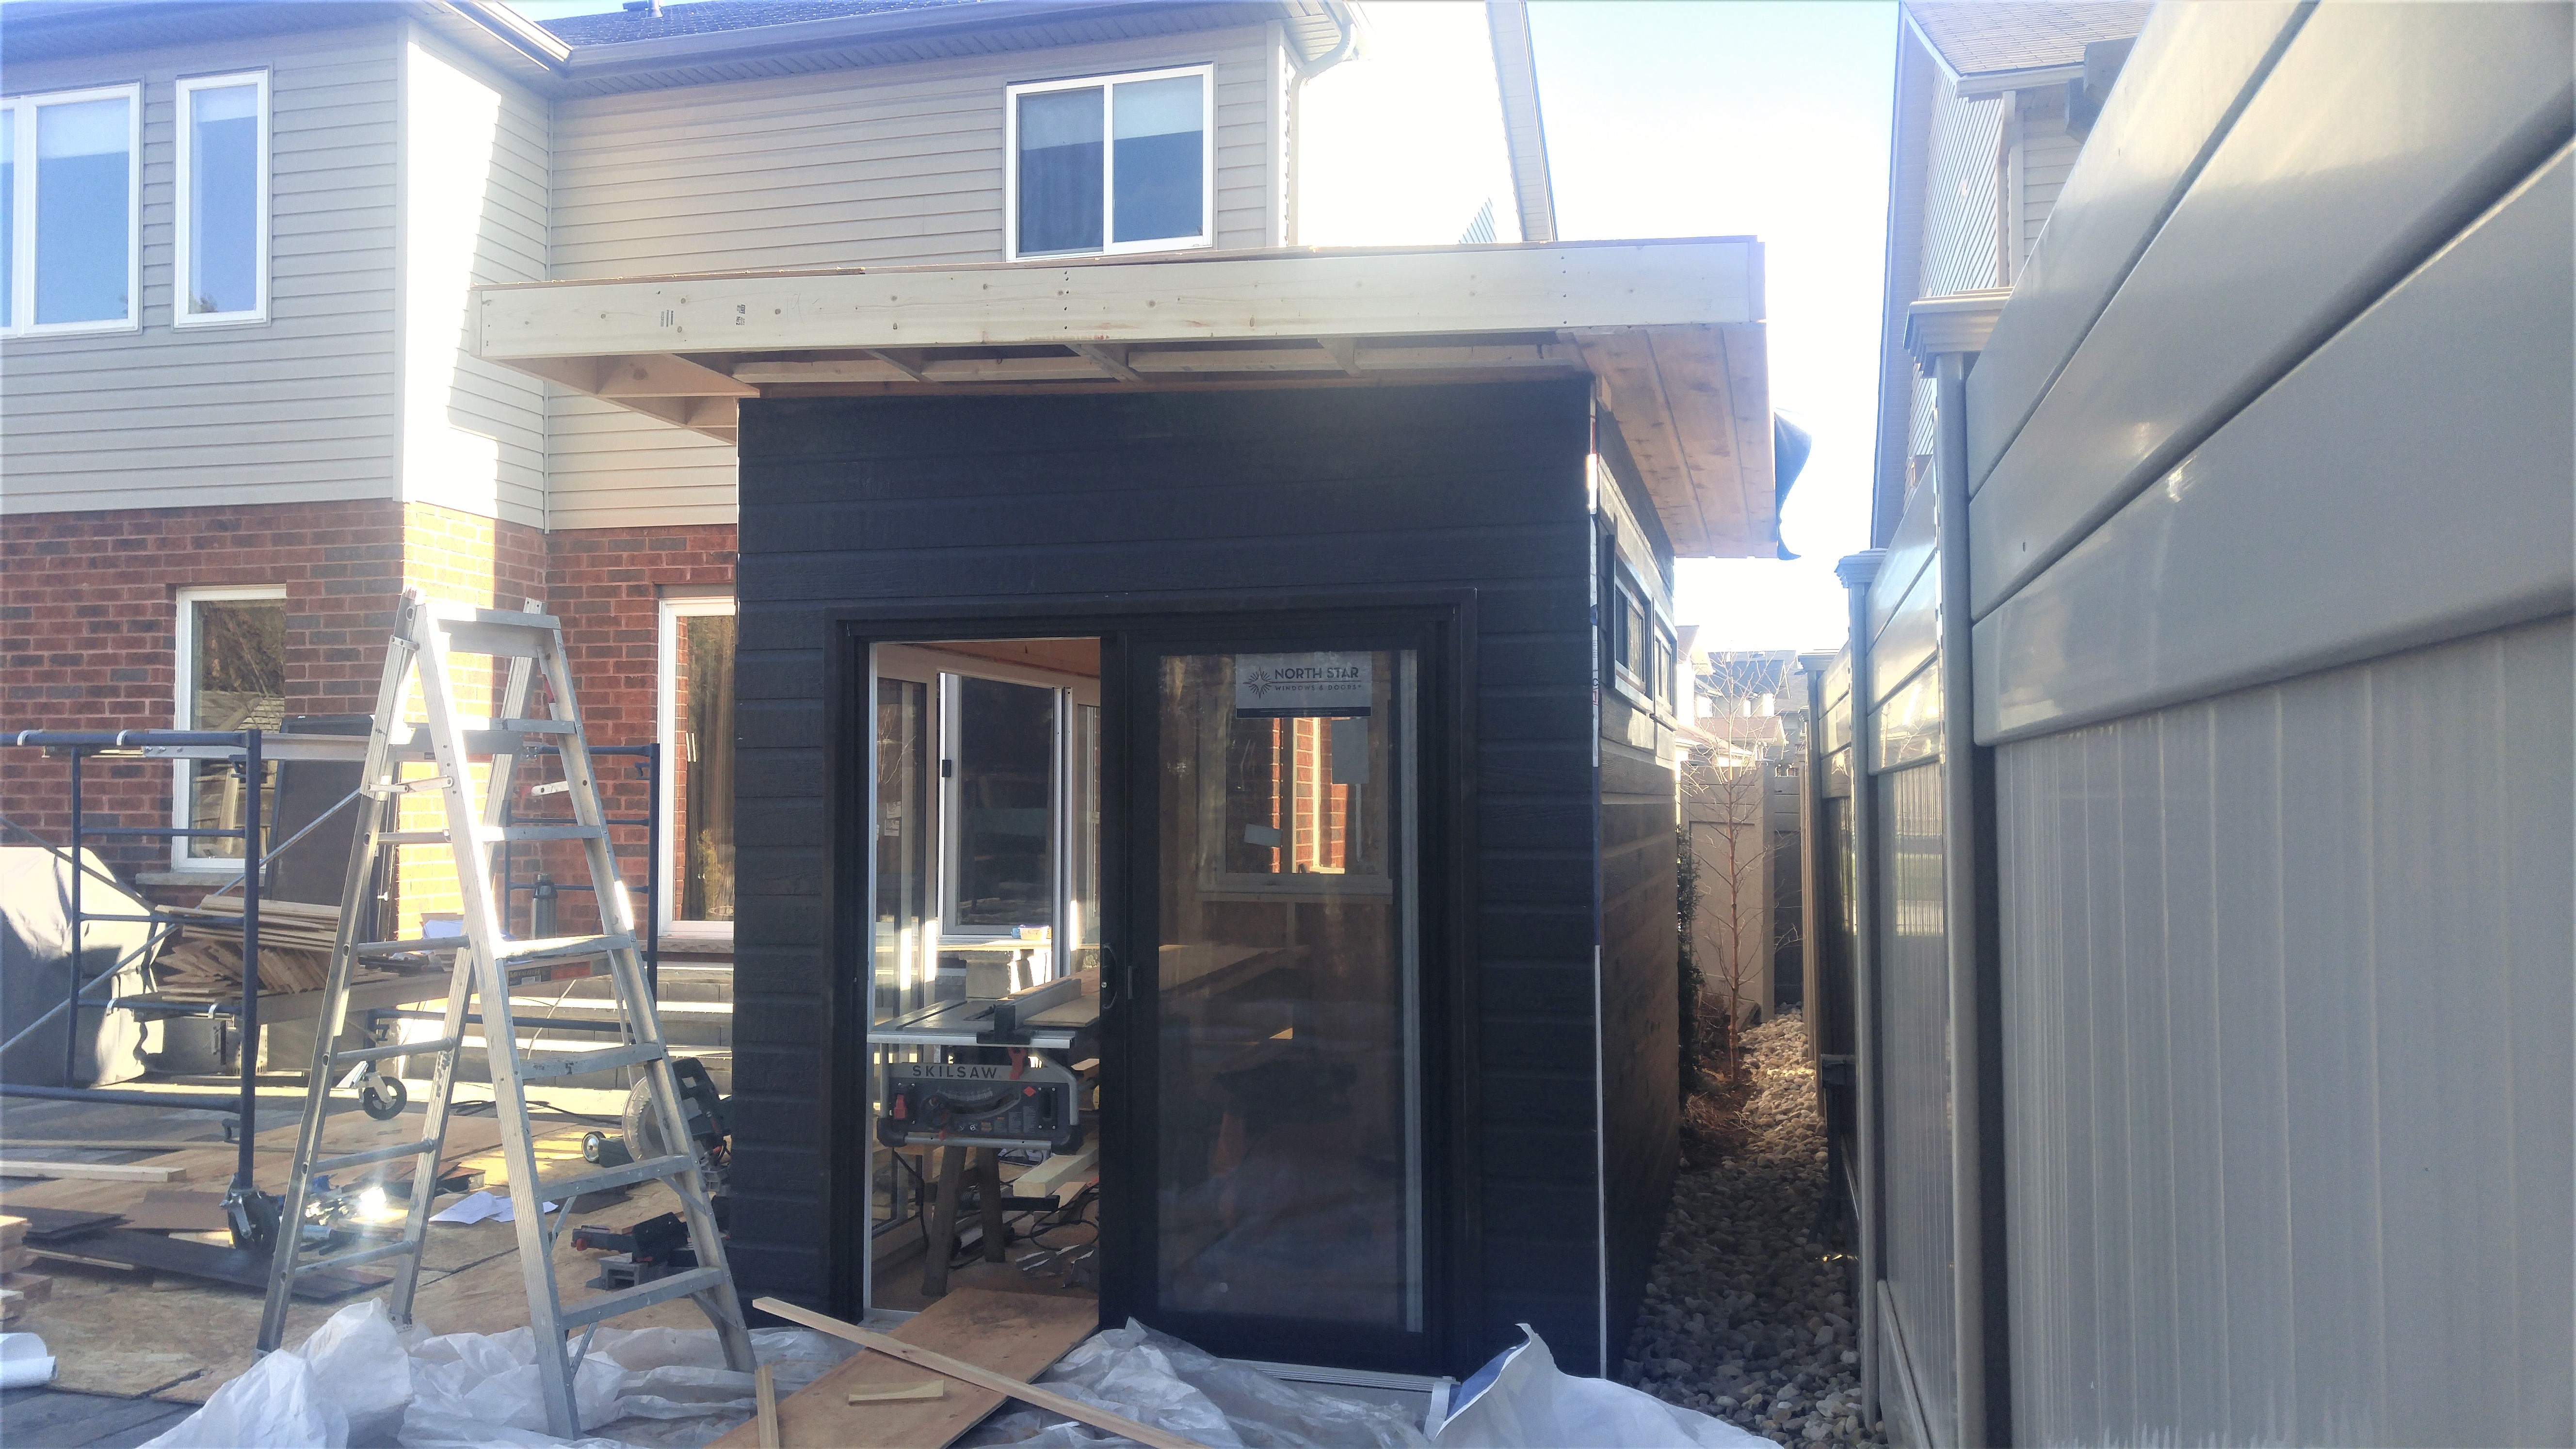 Canexel Verana 8x11 shed kit with Patio Doors in Guelph Ontario. ID number 221370-5